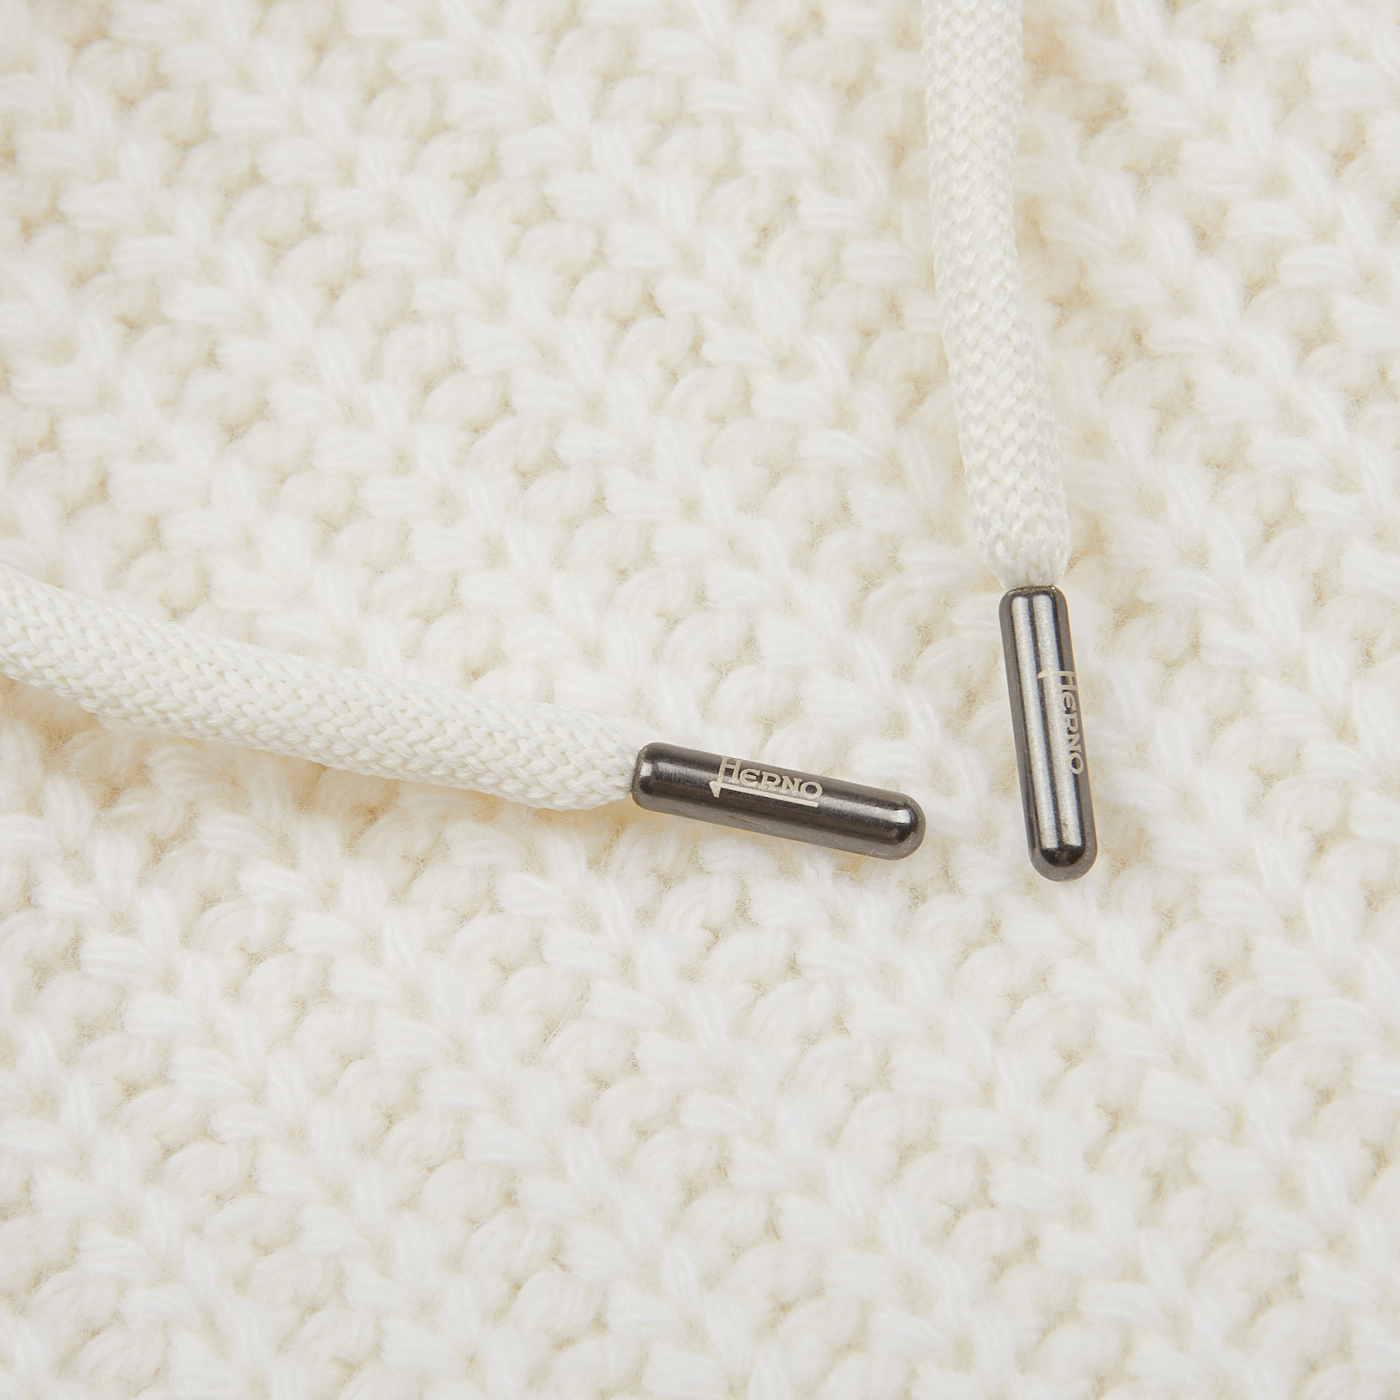 Close-up image of two white drawstrings with metallic tips labeled "HEDNO" on a textured virgin wool knitted fabric background from the Cream Wool Nylon Reversible Knitted Jacket by Herno.